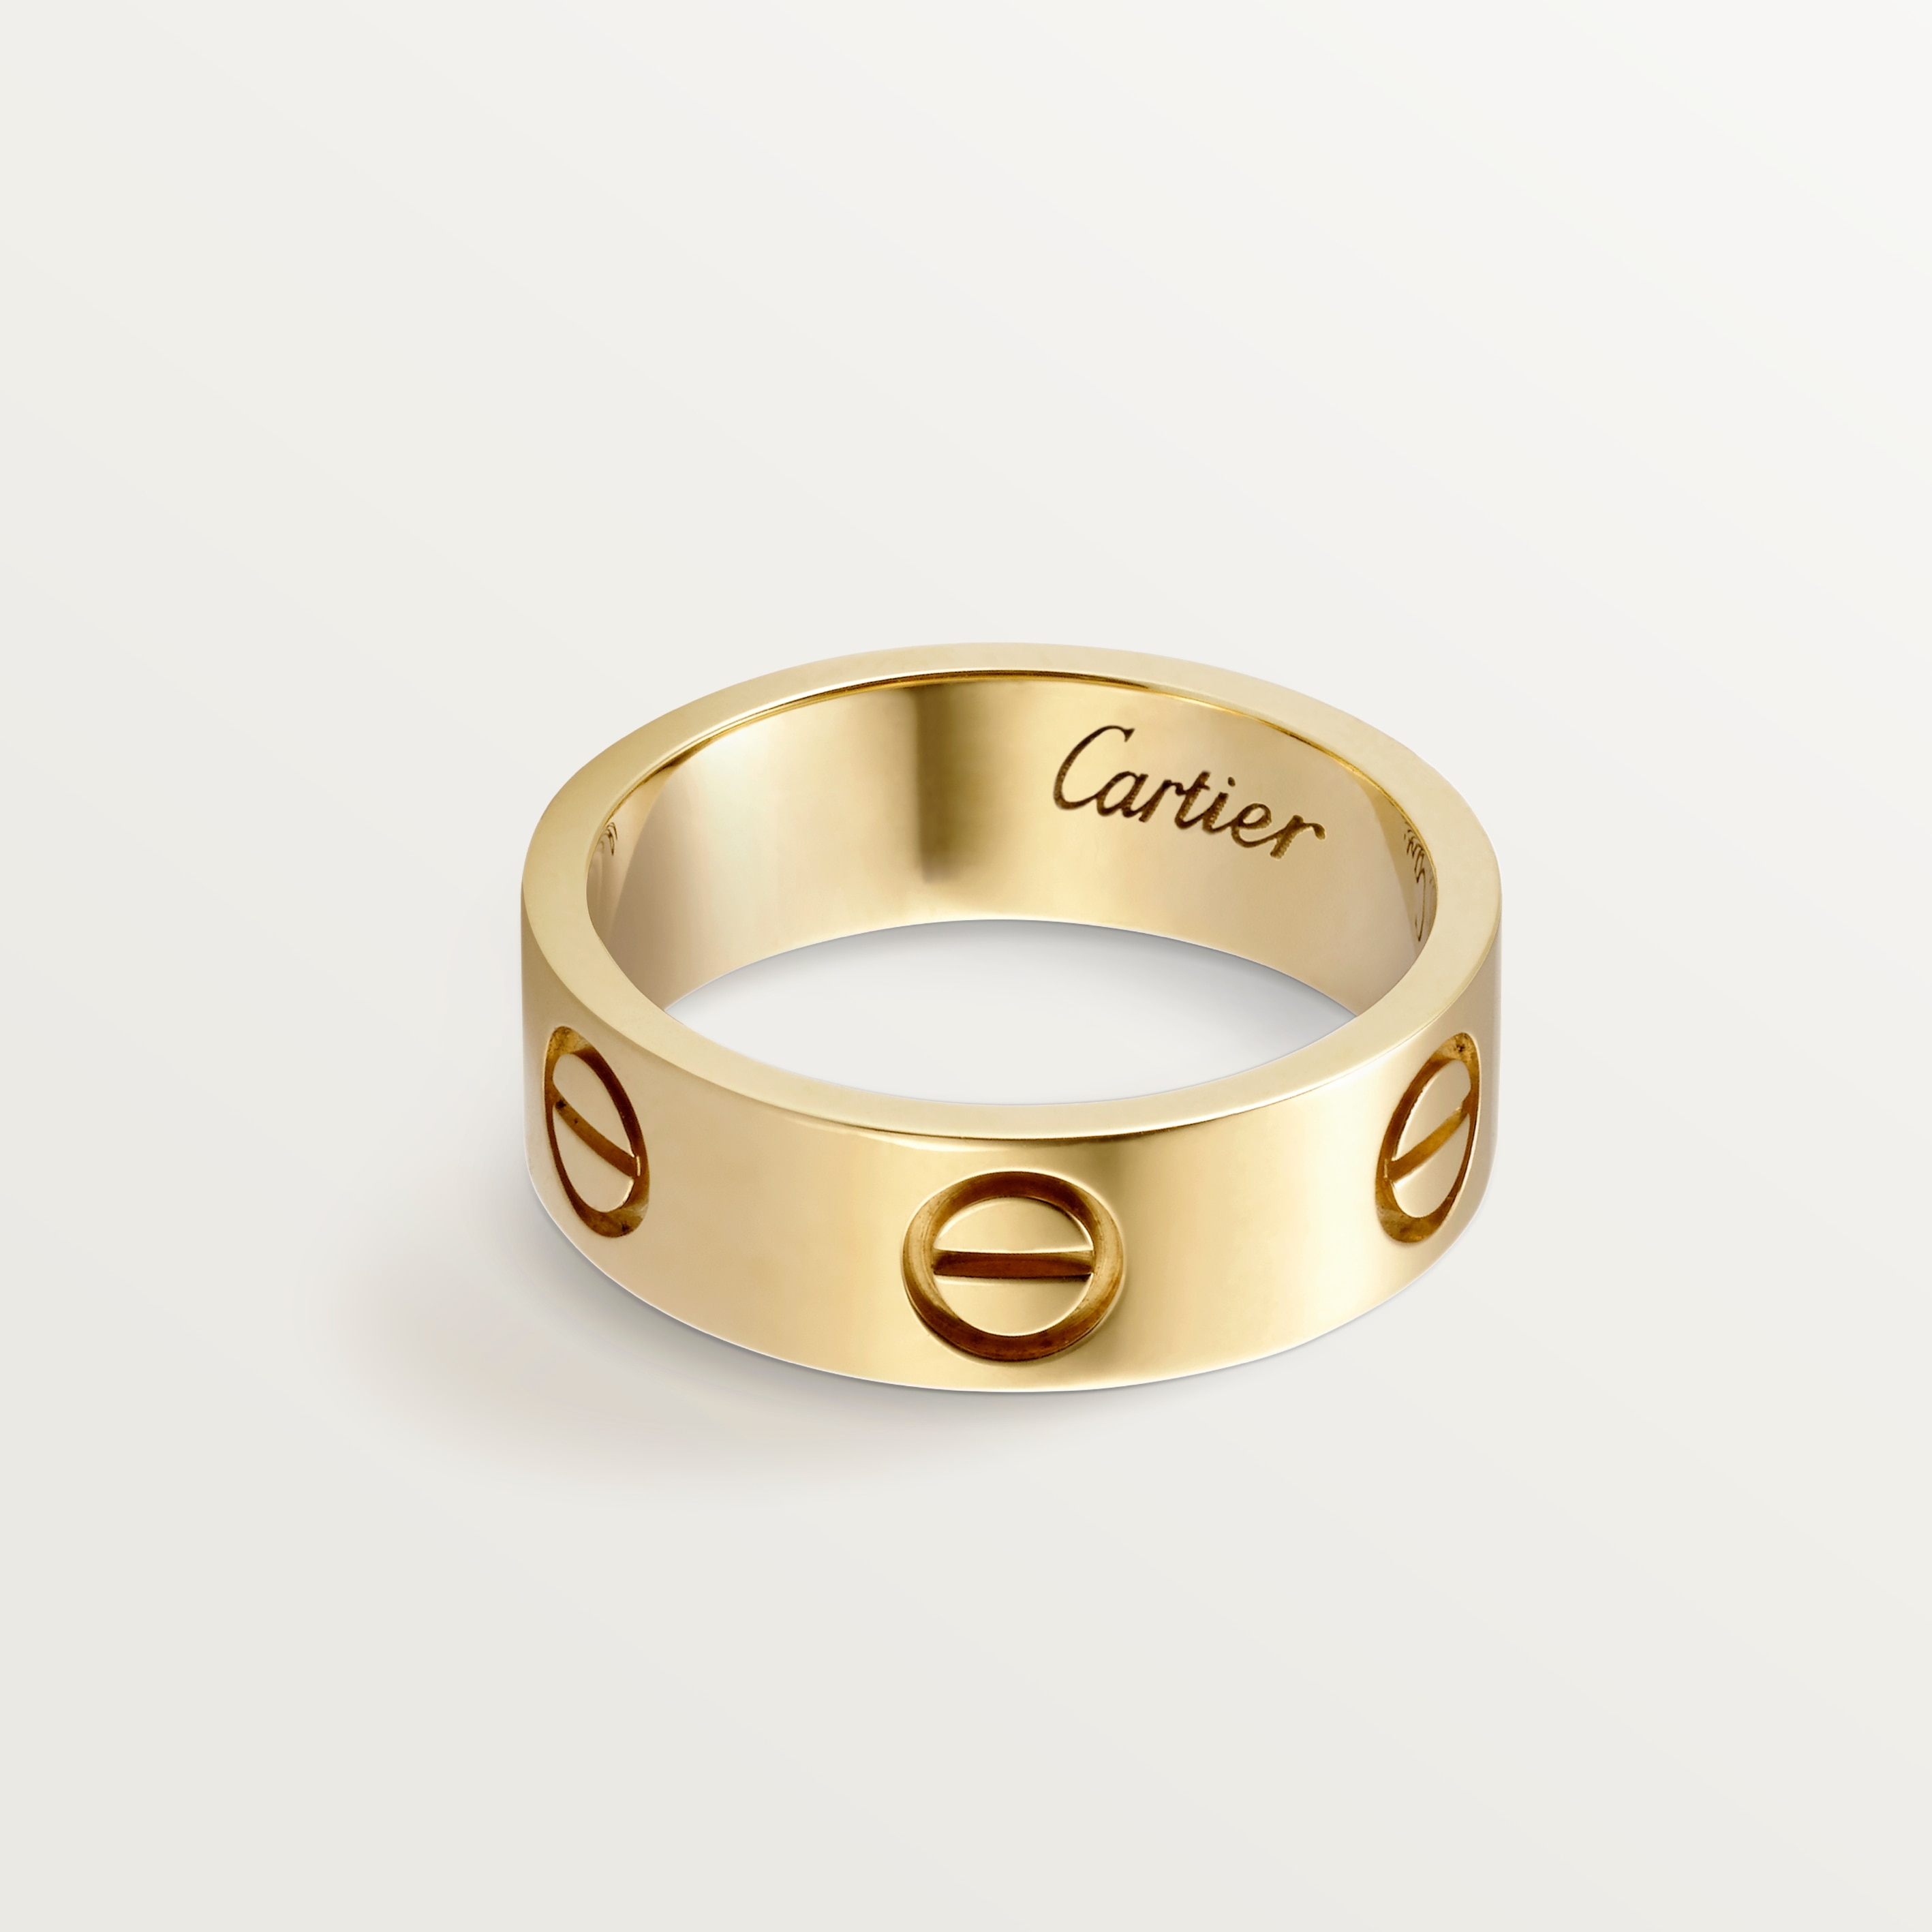 The Love Collection | Rings, Bracelets & Necklaces | Cartier